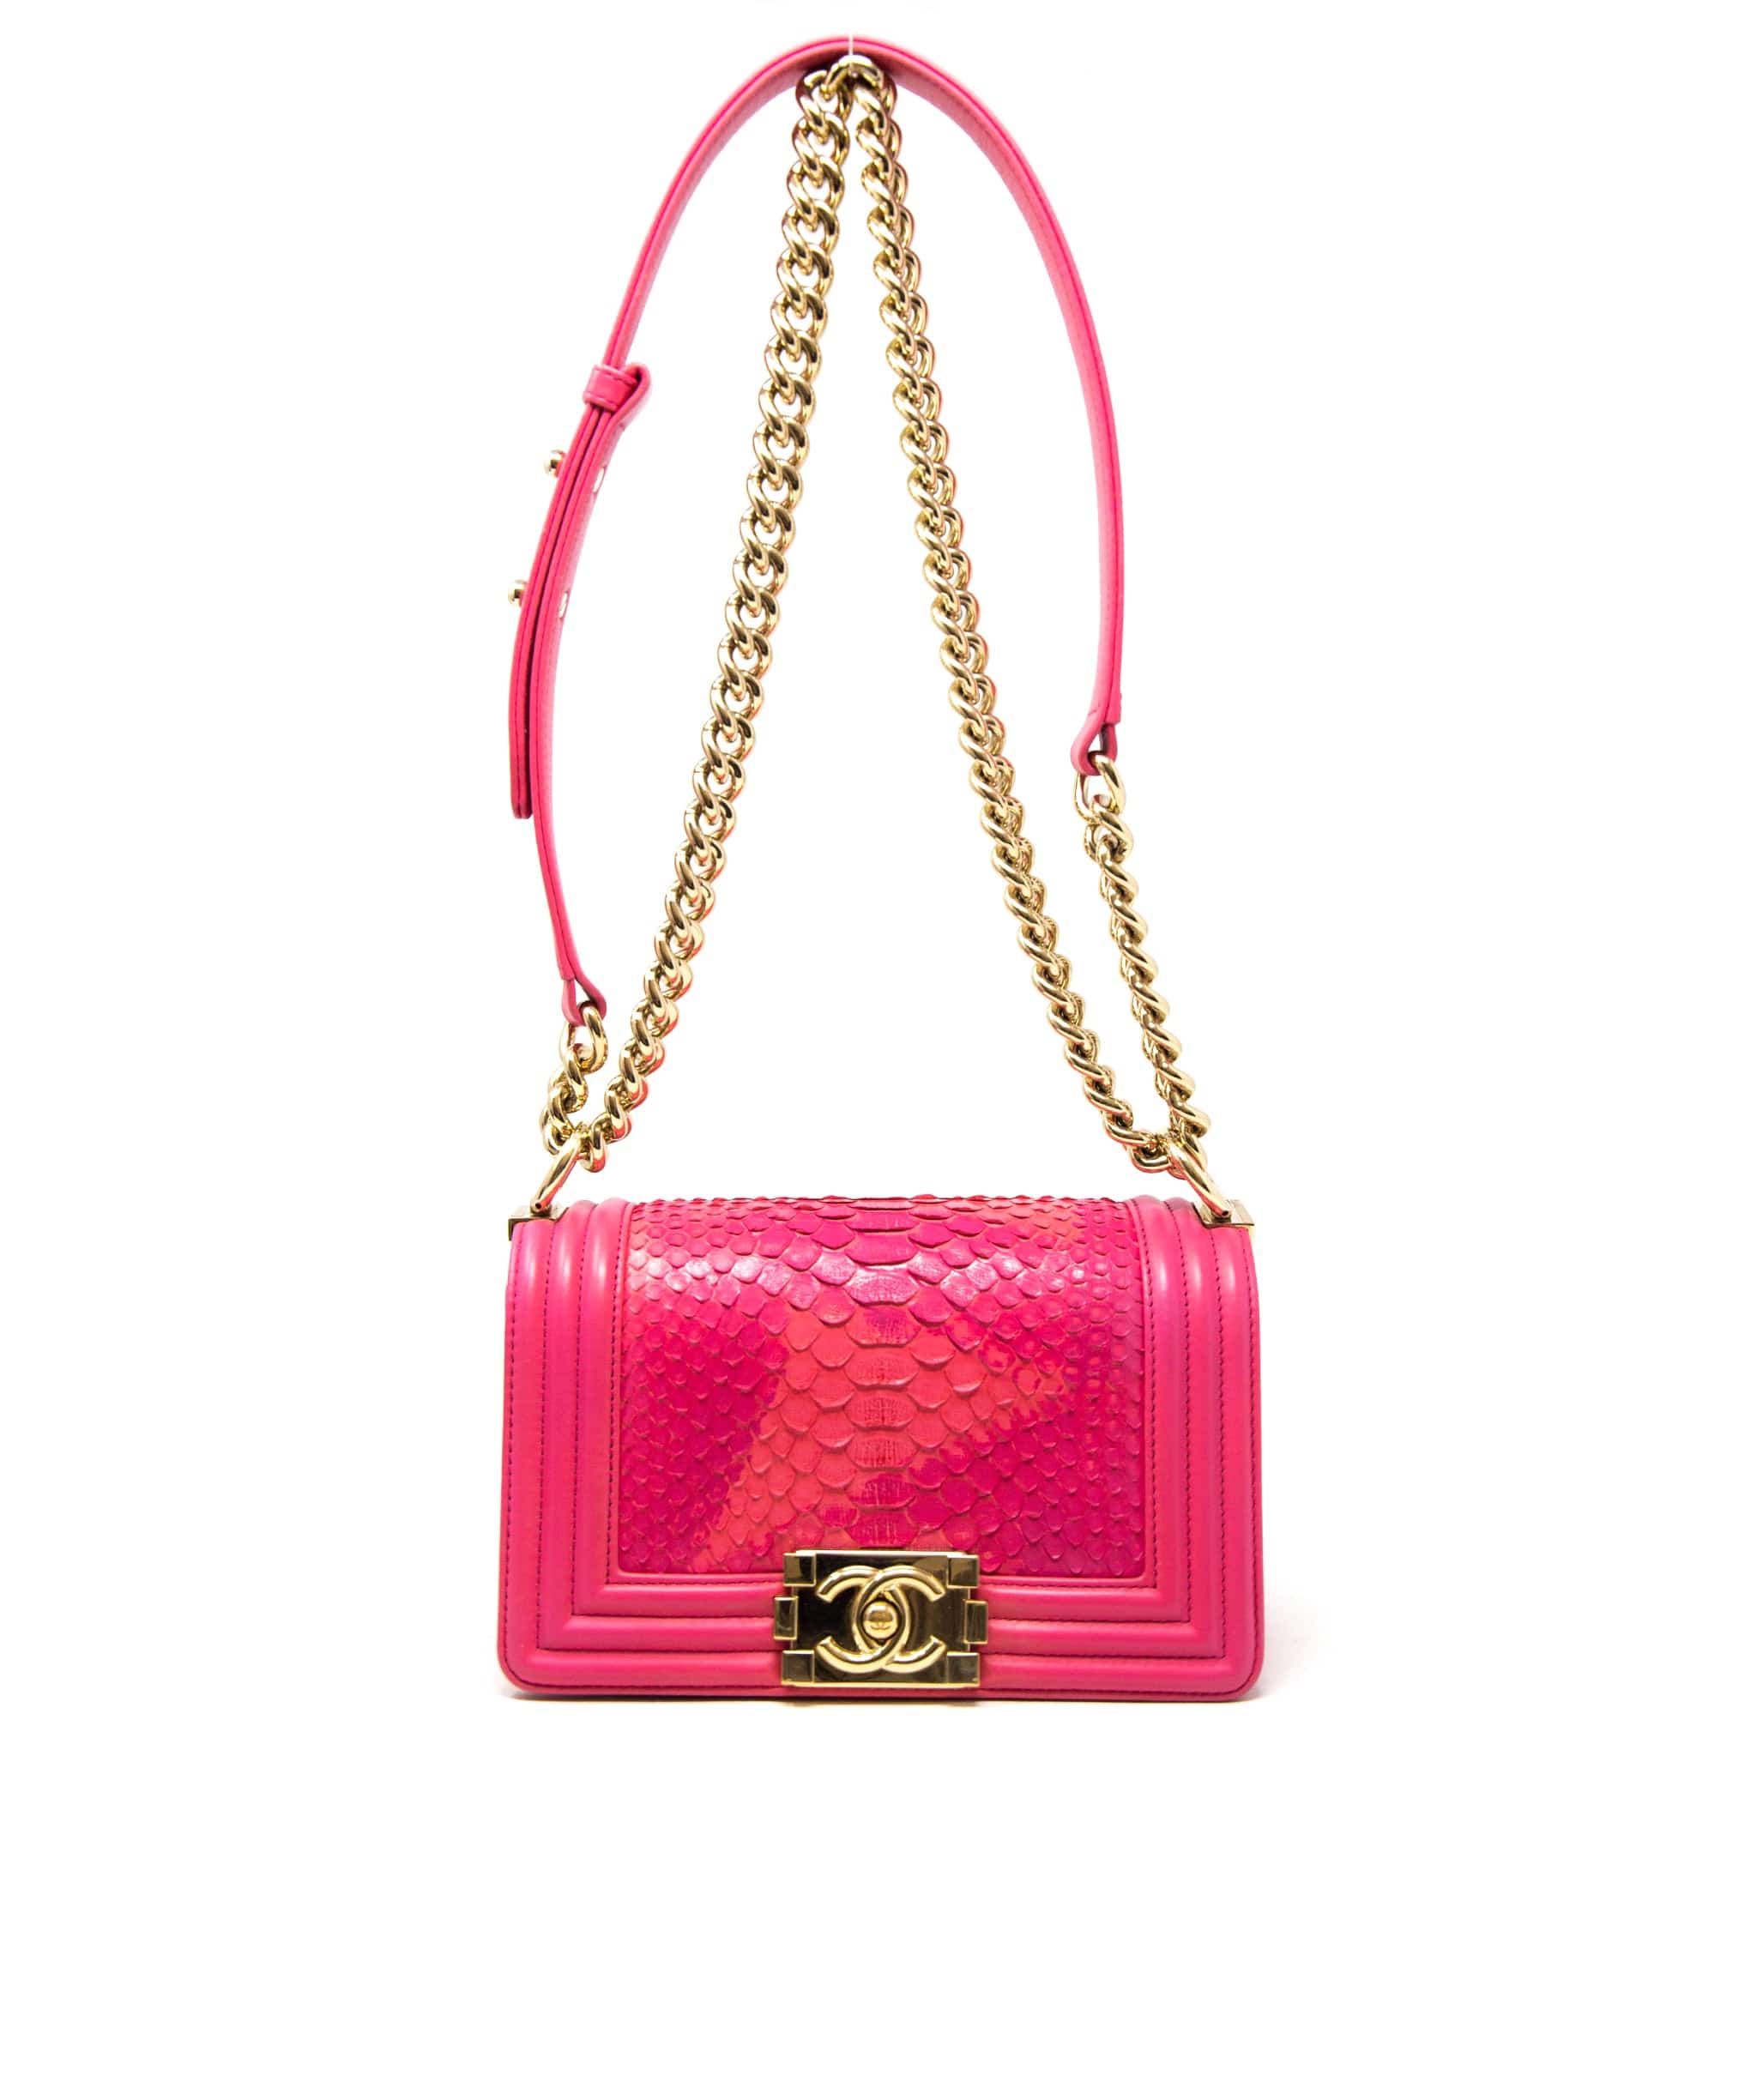 Chanel Chanel hot pink small python boy bag, with champagne gold hardware.  AGC1163